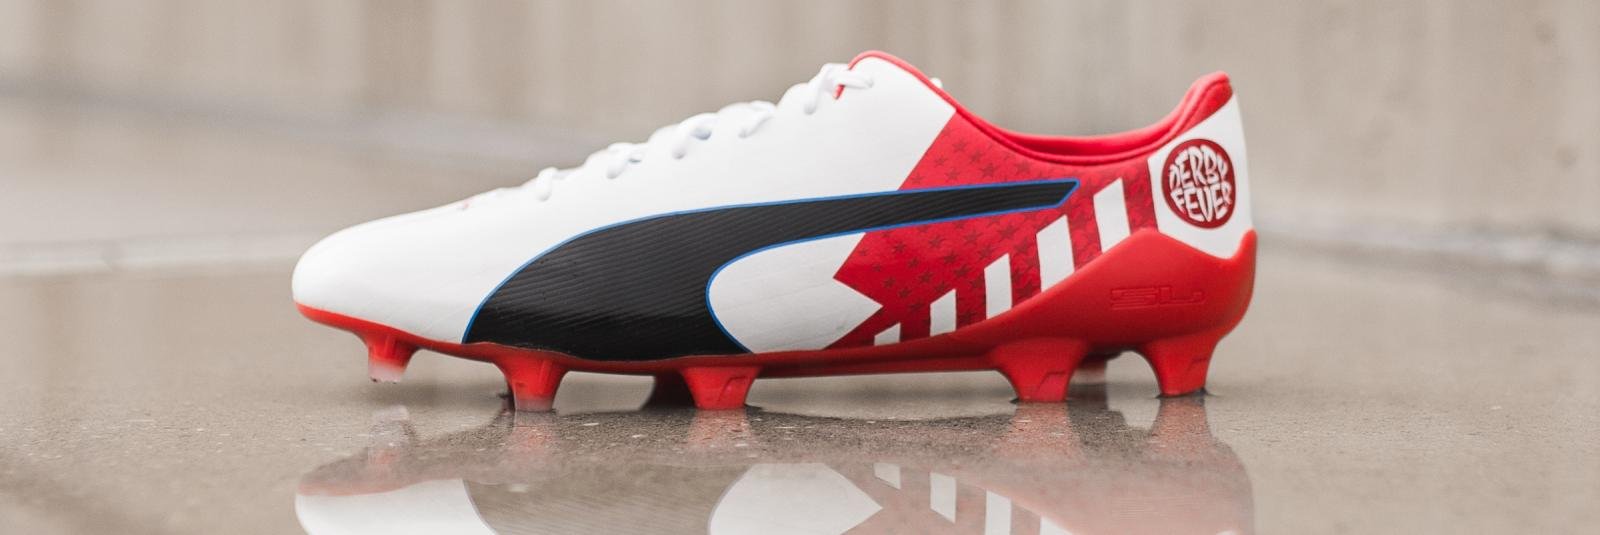 Manchester United target shows off new PUMA boots ahead of Madrid Derby